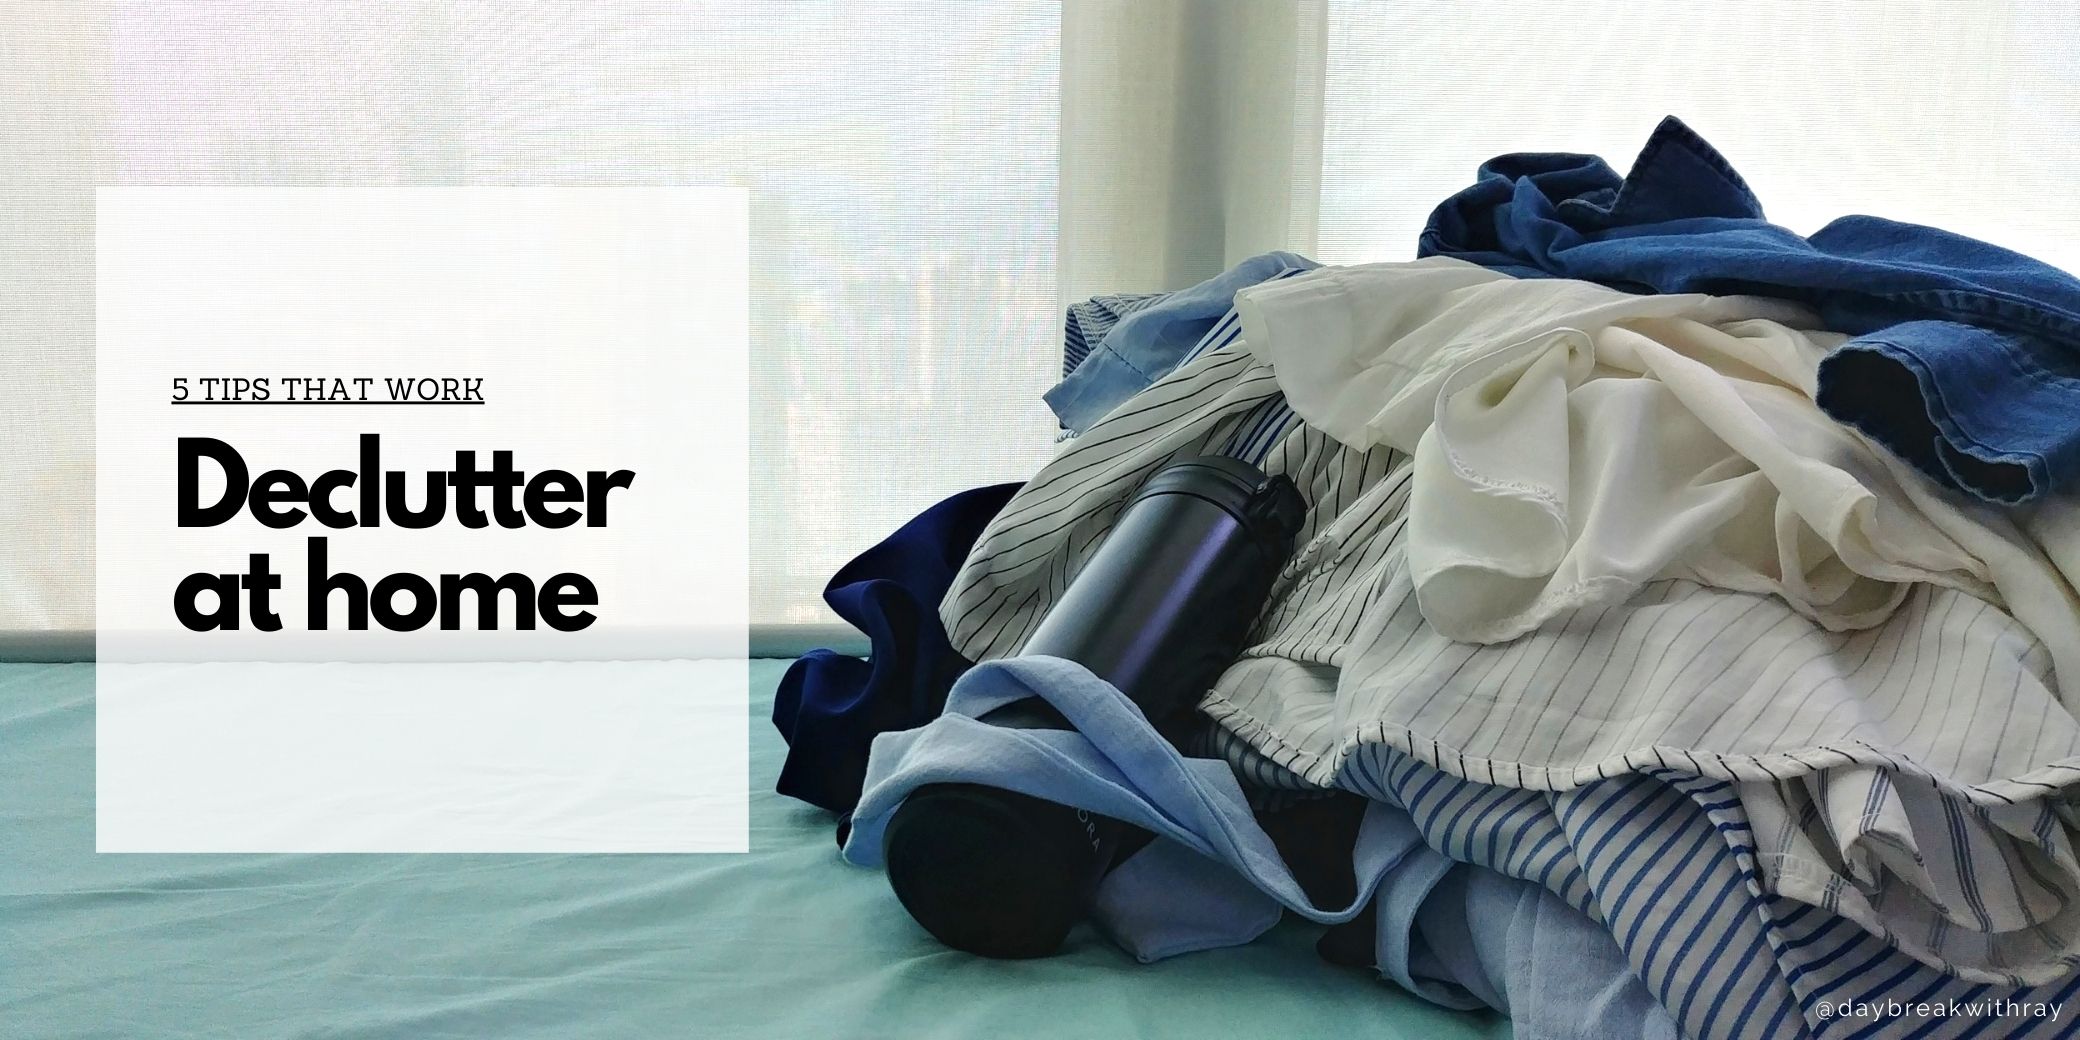 (Featured Image) 5 ways to declutter at home